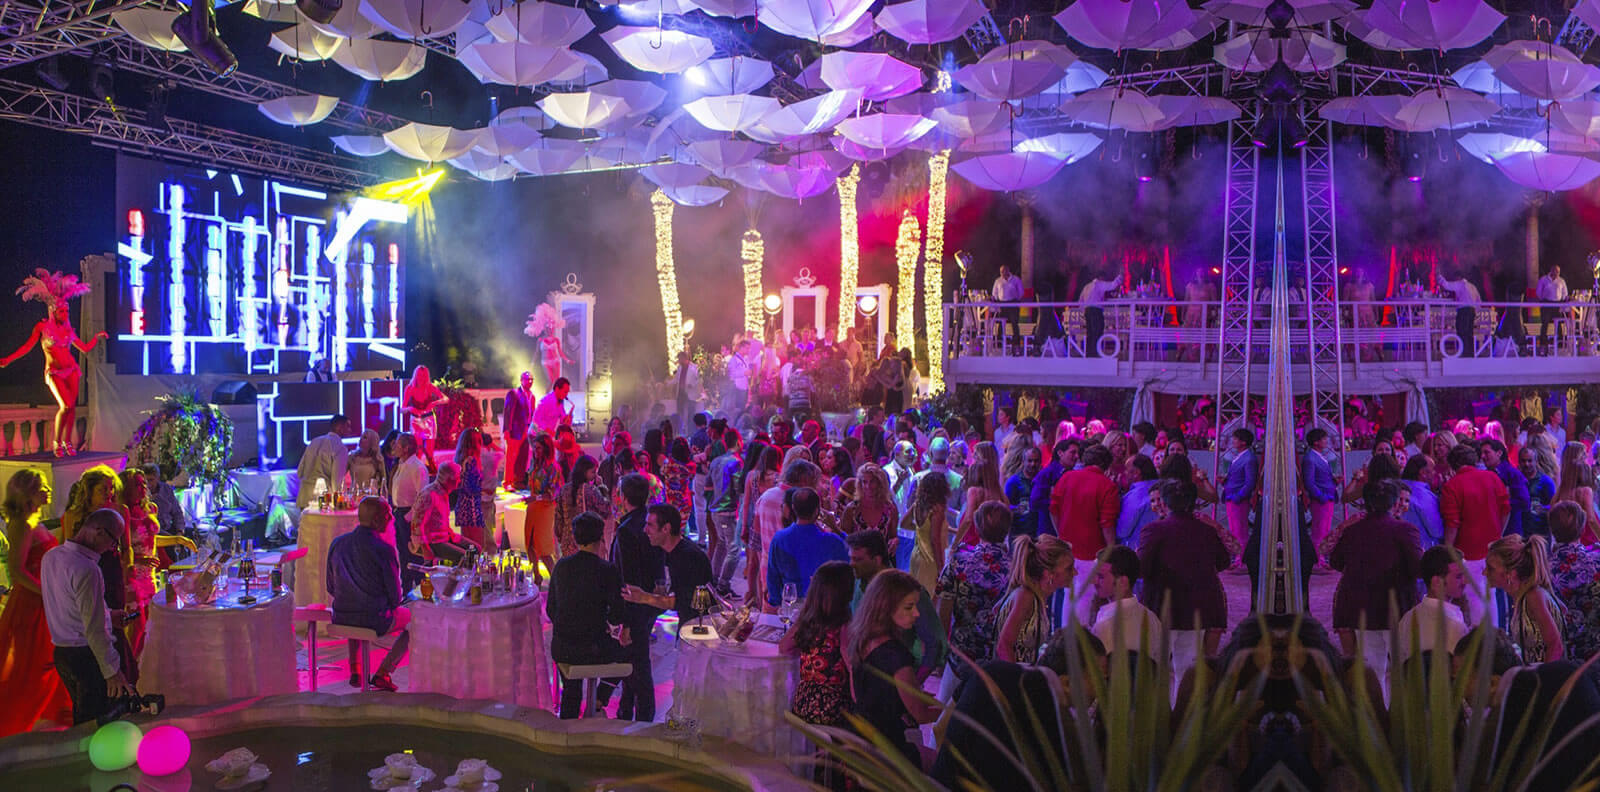 Saint-Tropez Nightlife The Best Clubs and Bars